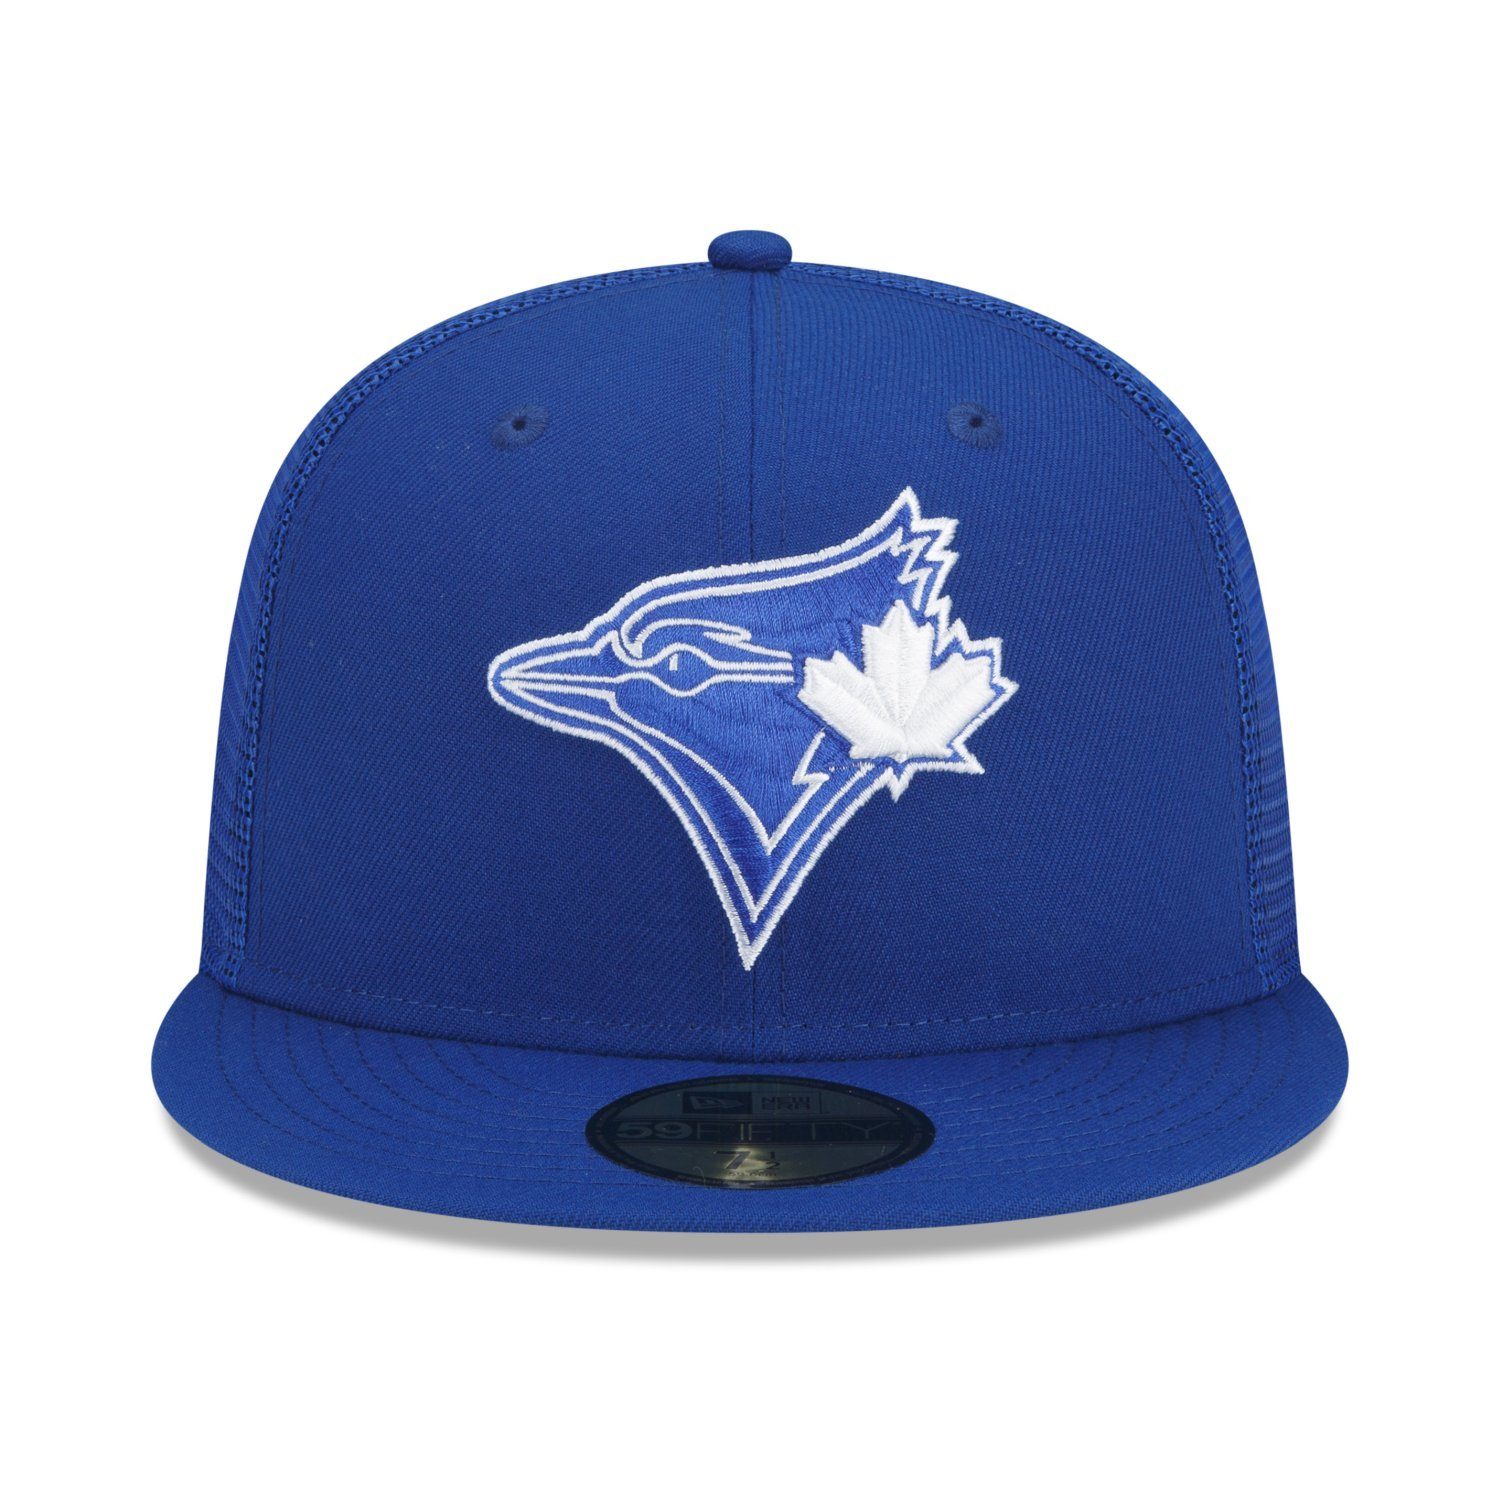 PRACTICE BATTING New Jays Era Toronto Cap Fitted 59Fifty